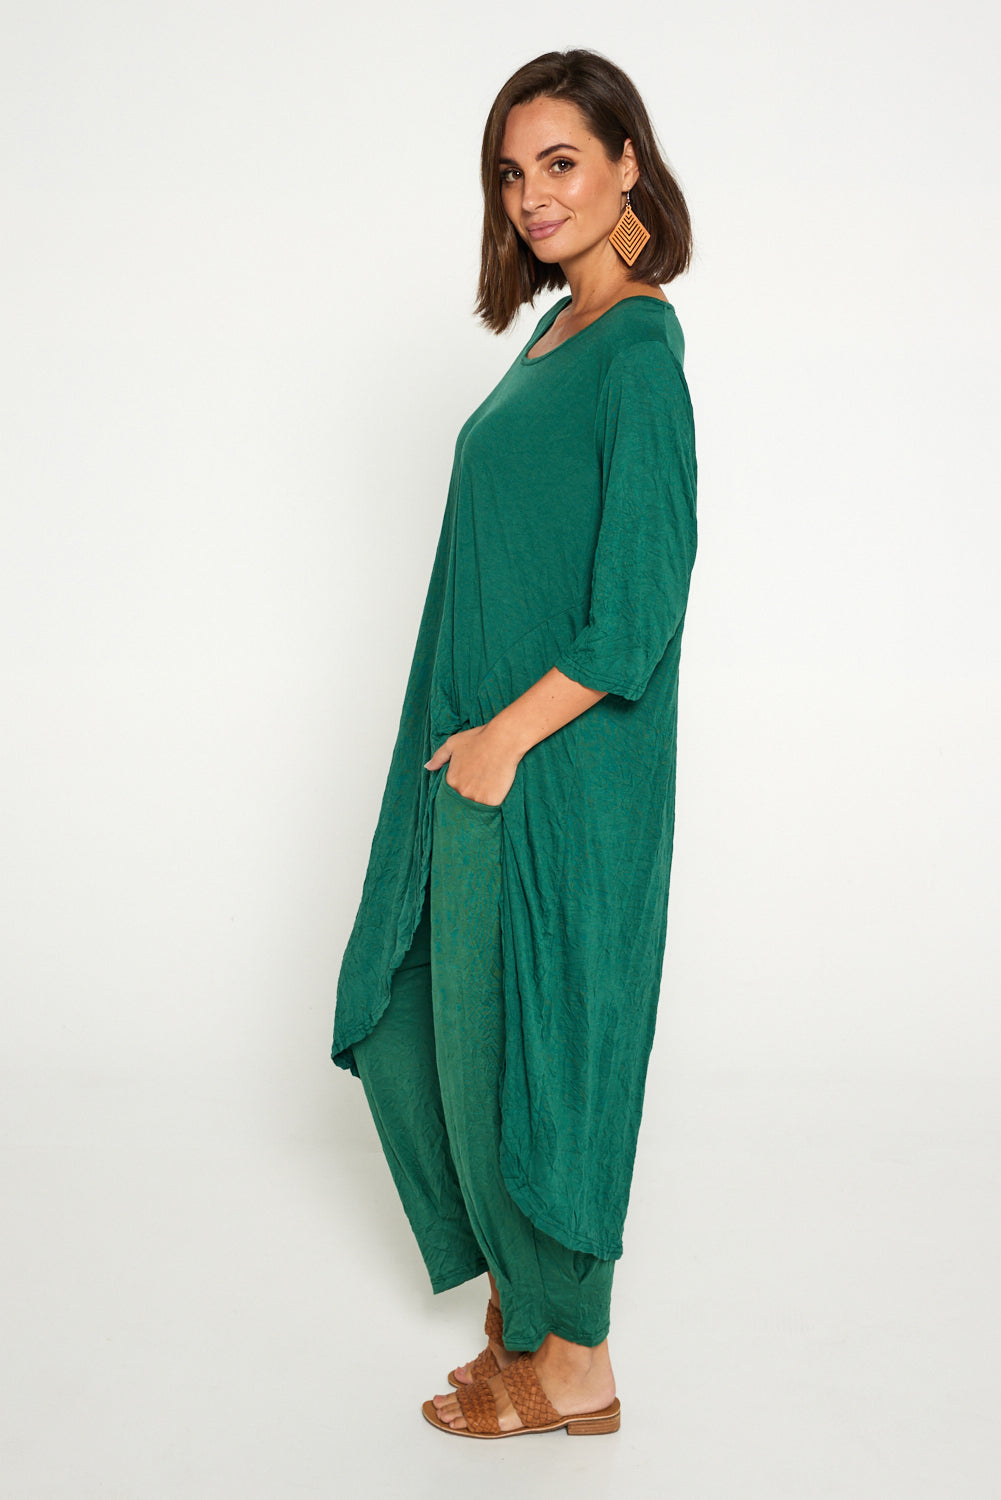 Ayana Cotton Tunic Top - Forest Green